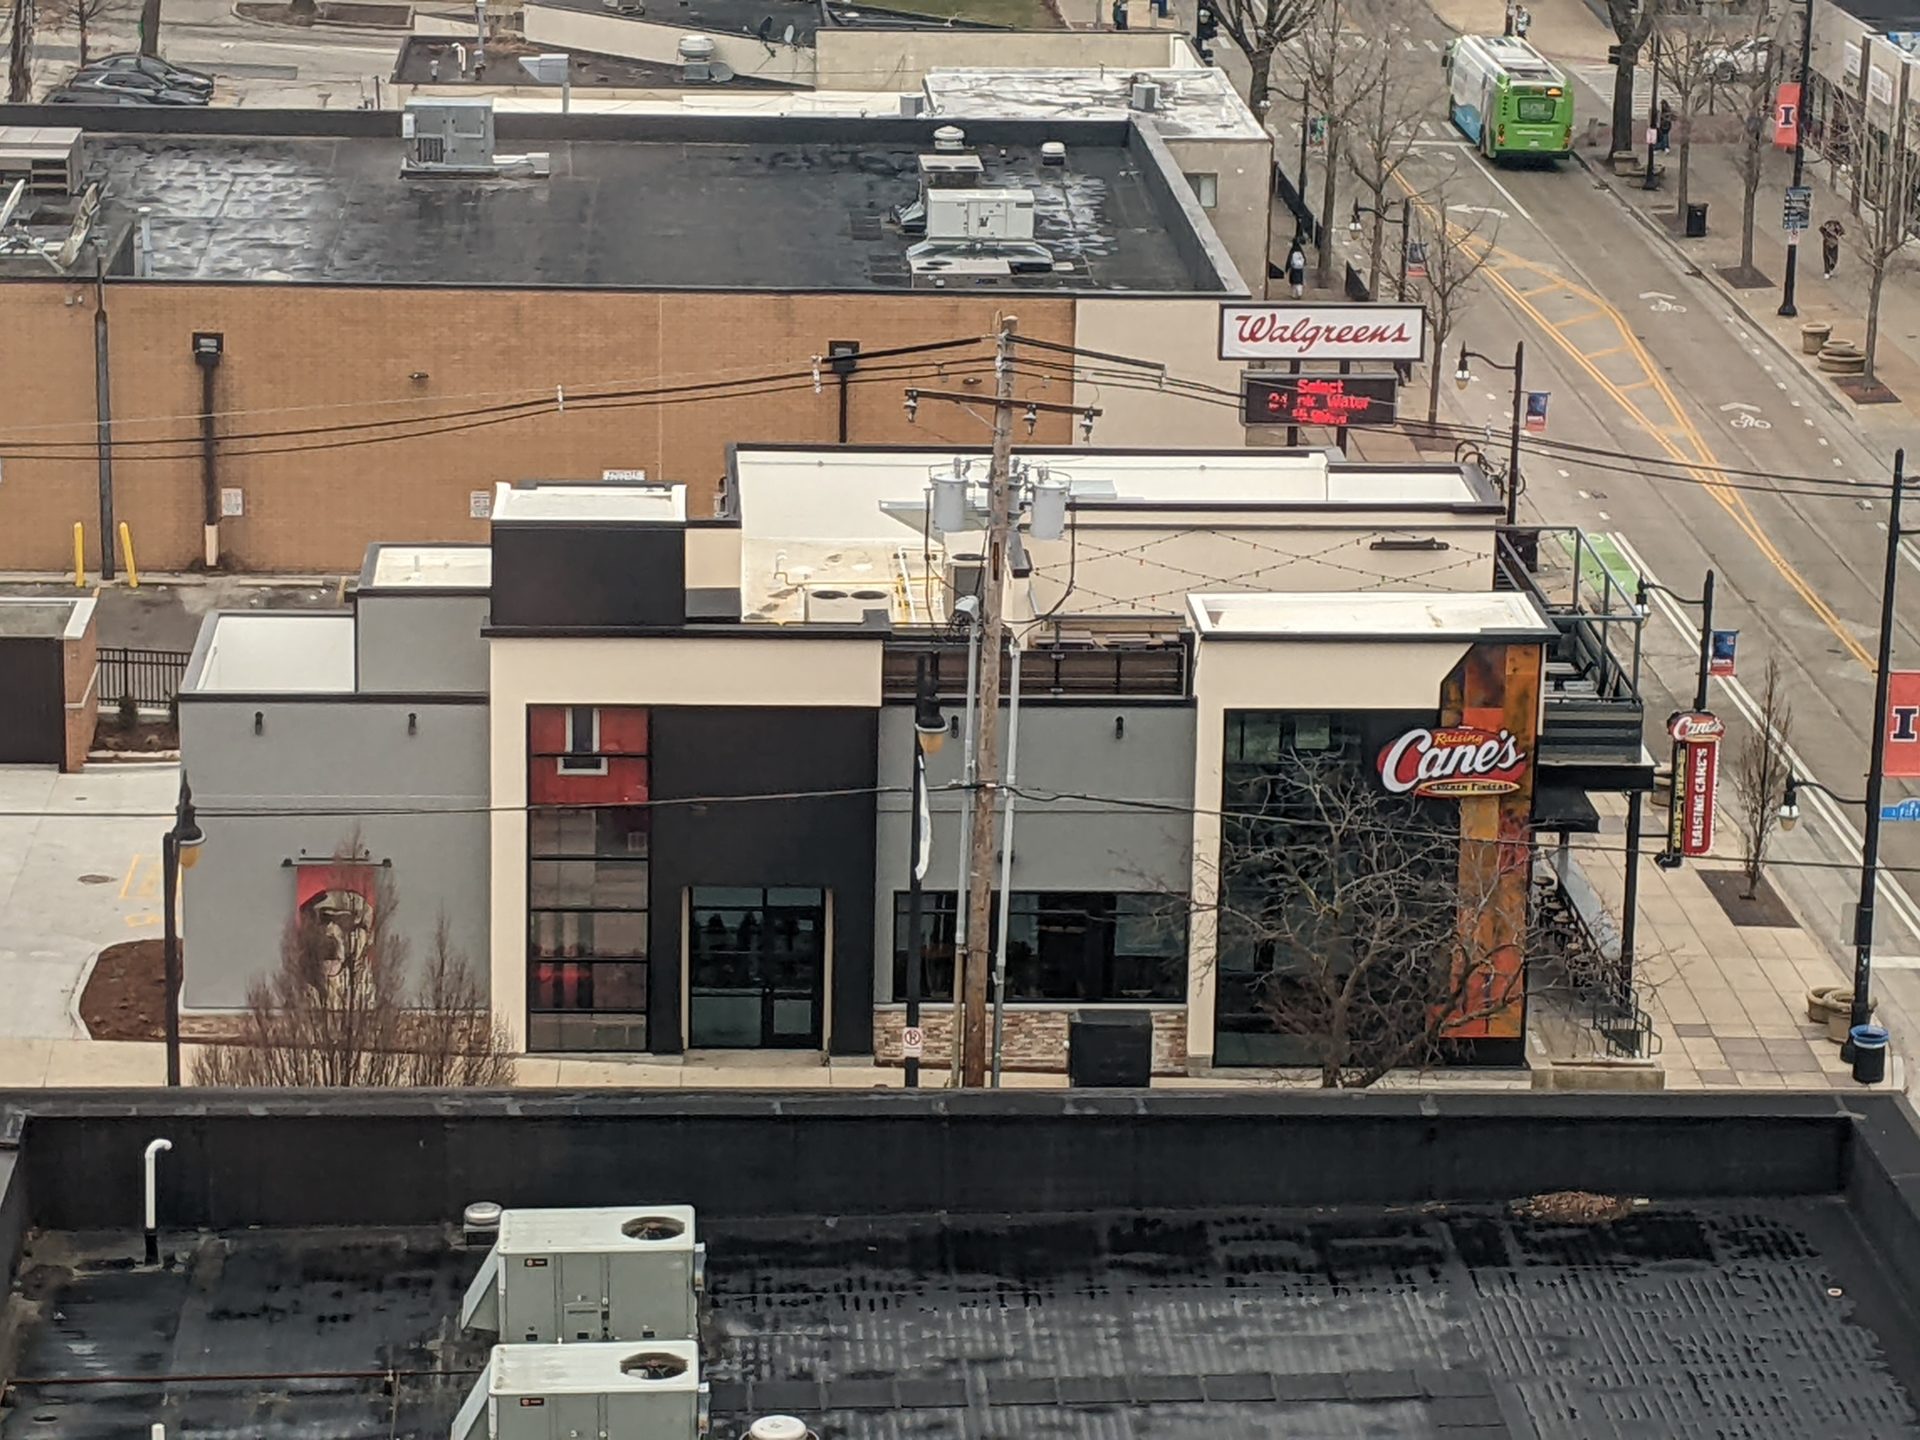 View from above of a building with a gray, black, and cream colored exterior. There is a Raising Cane's sign on one side. Across the roof are string lights.